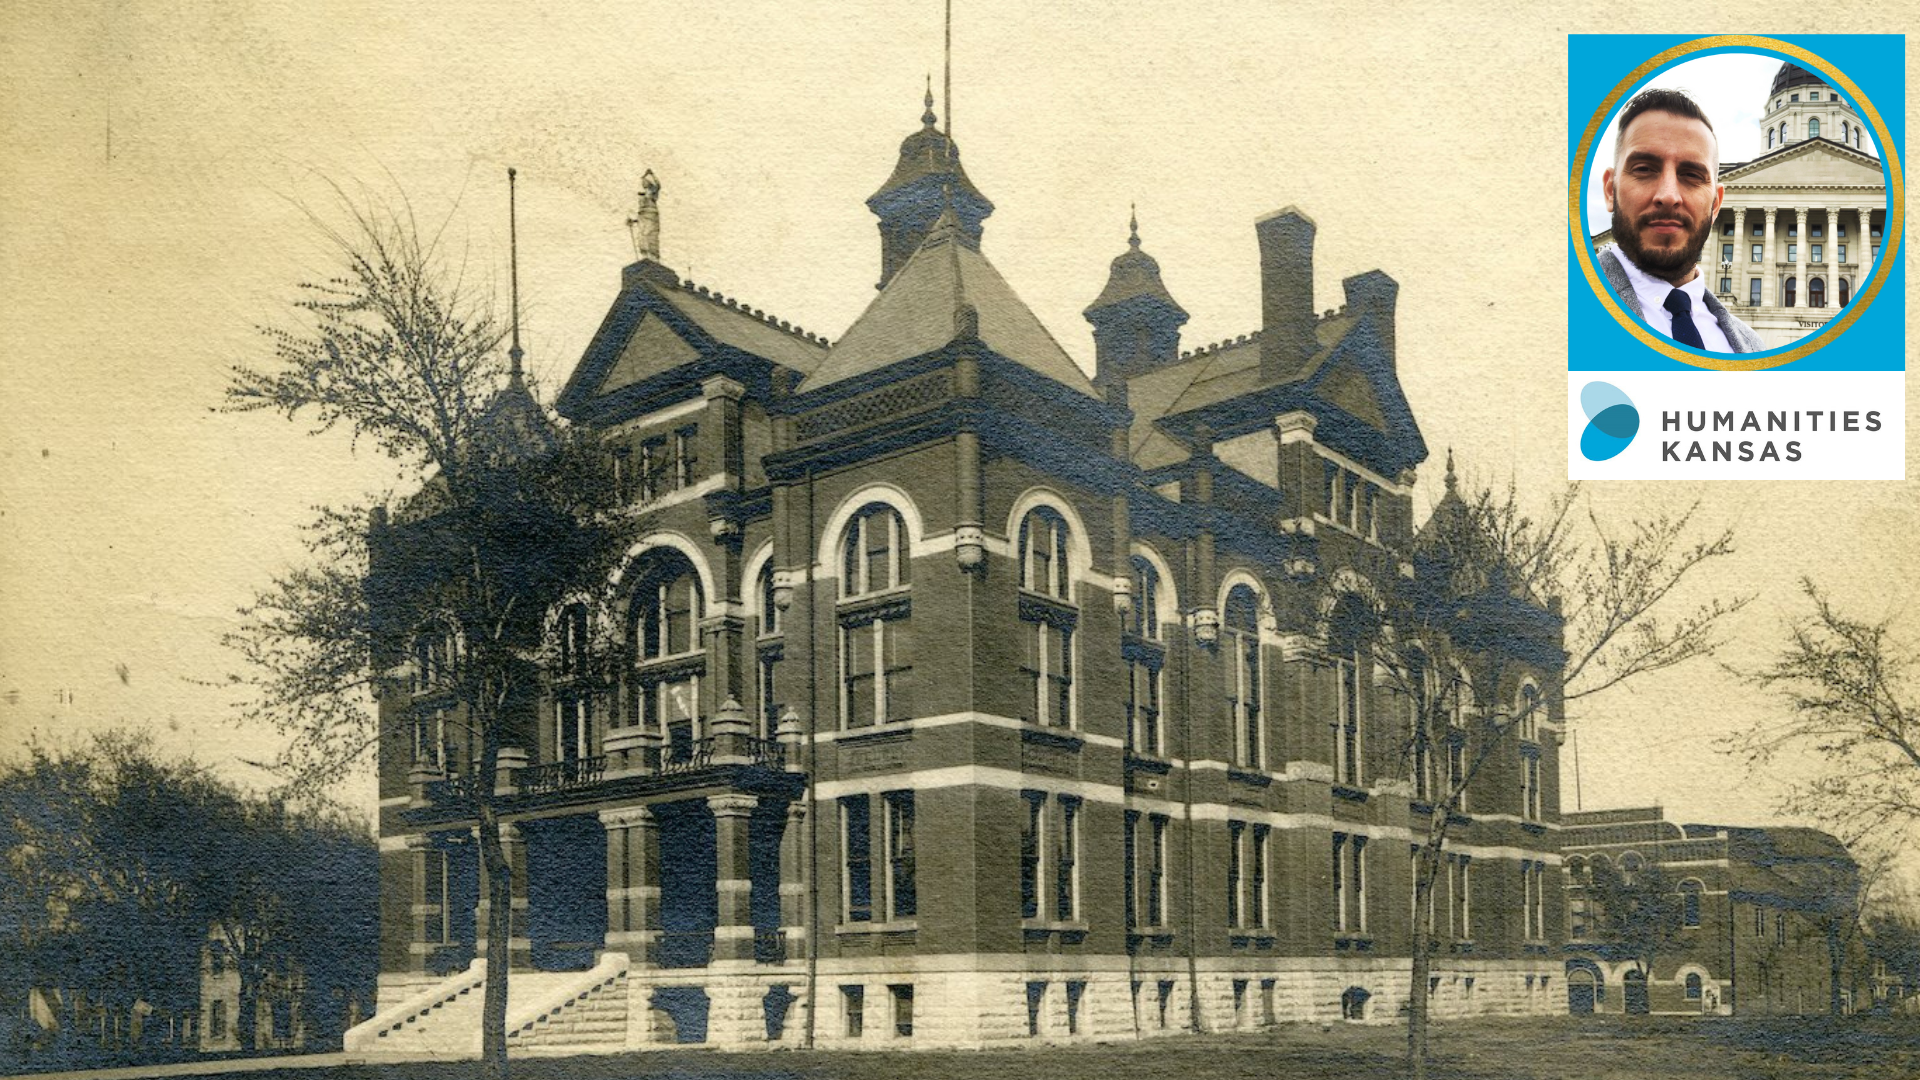 Sepia-toned photo of the Franklin County Courthouse, a three-story brick and stone victorian building. Inset: graphic of a man with dark hair and a beard. Humanities Kansas logo.